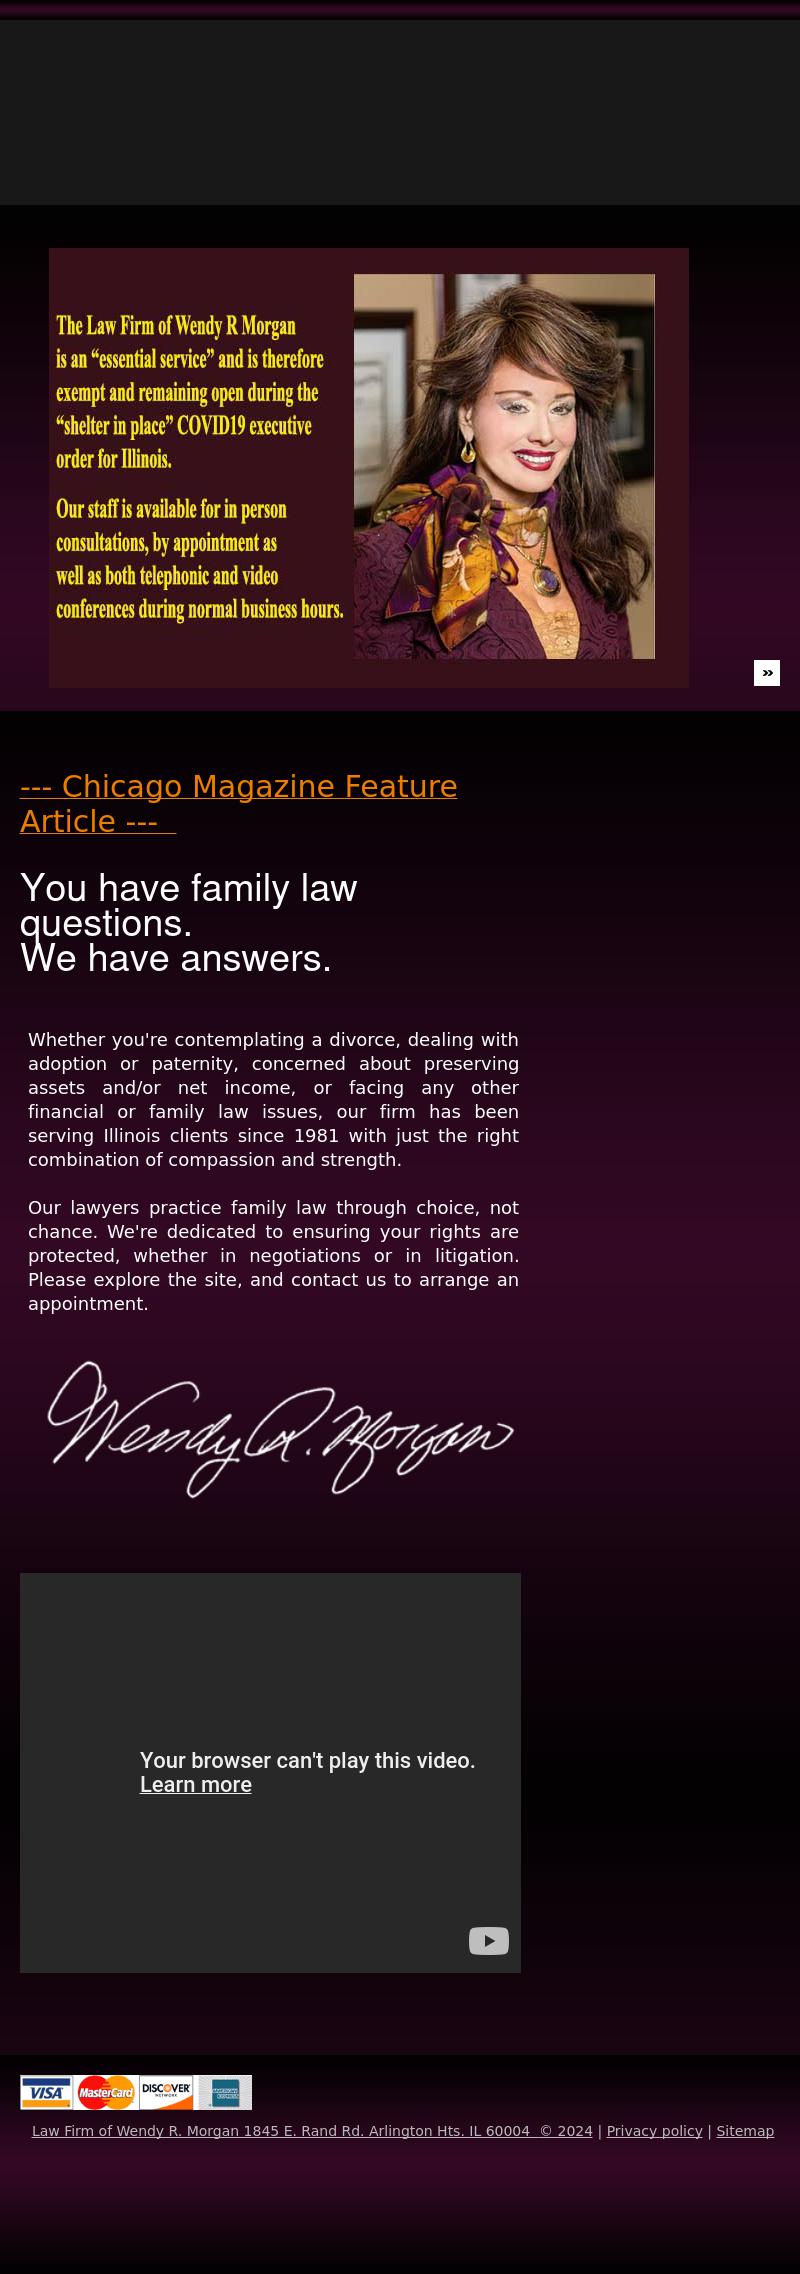 The Law Firm of Wendy R. Morgan - Lincolnshire IL Lawyers